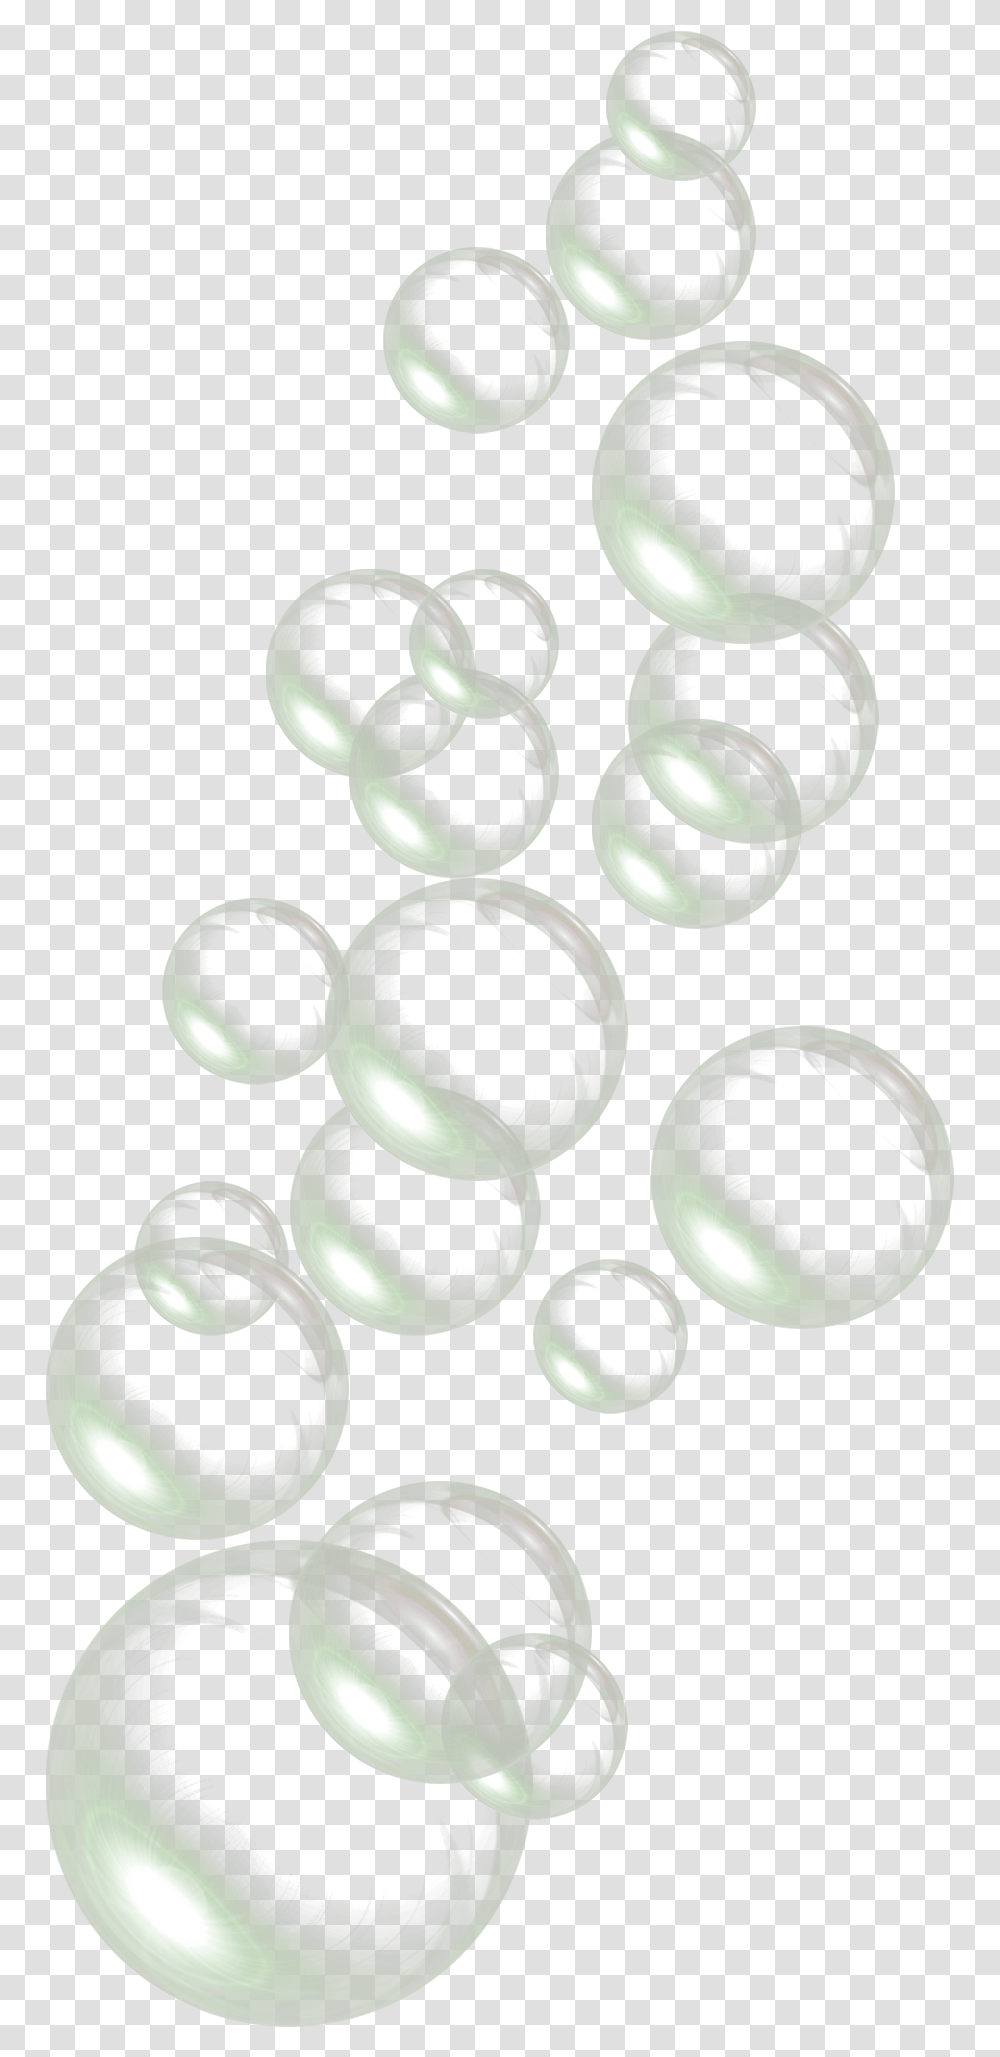 Download Water Of Bubbles Drops Free Image Hq Circle, Rattle Transparent Png